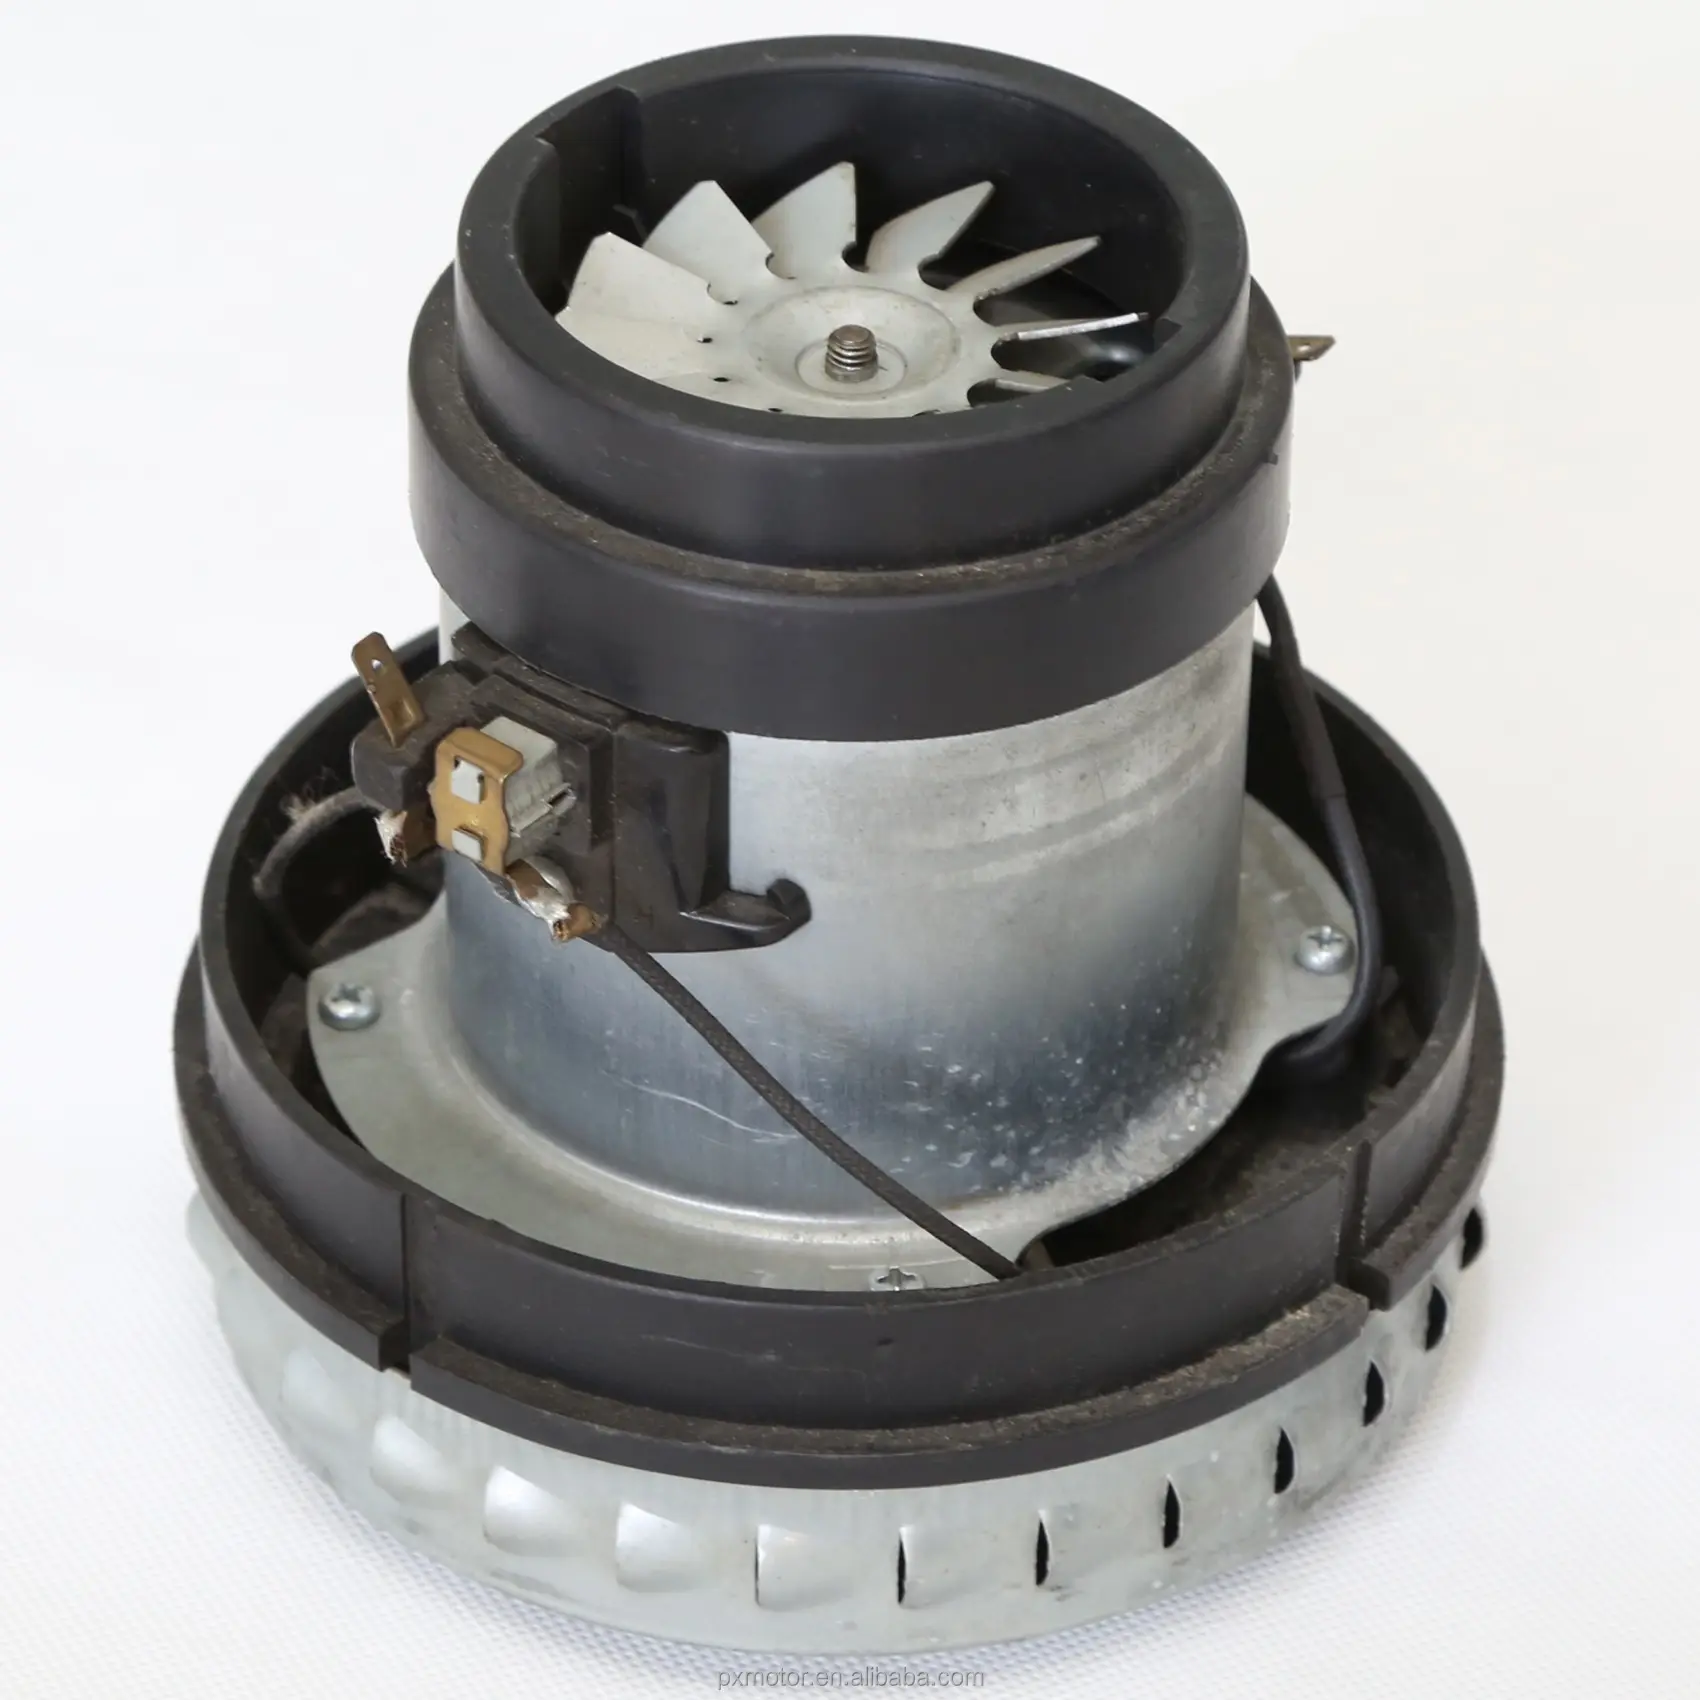 PX-PDW wet and dry vacuum cleaner motor